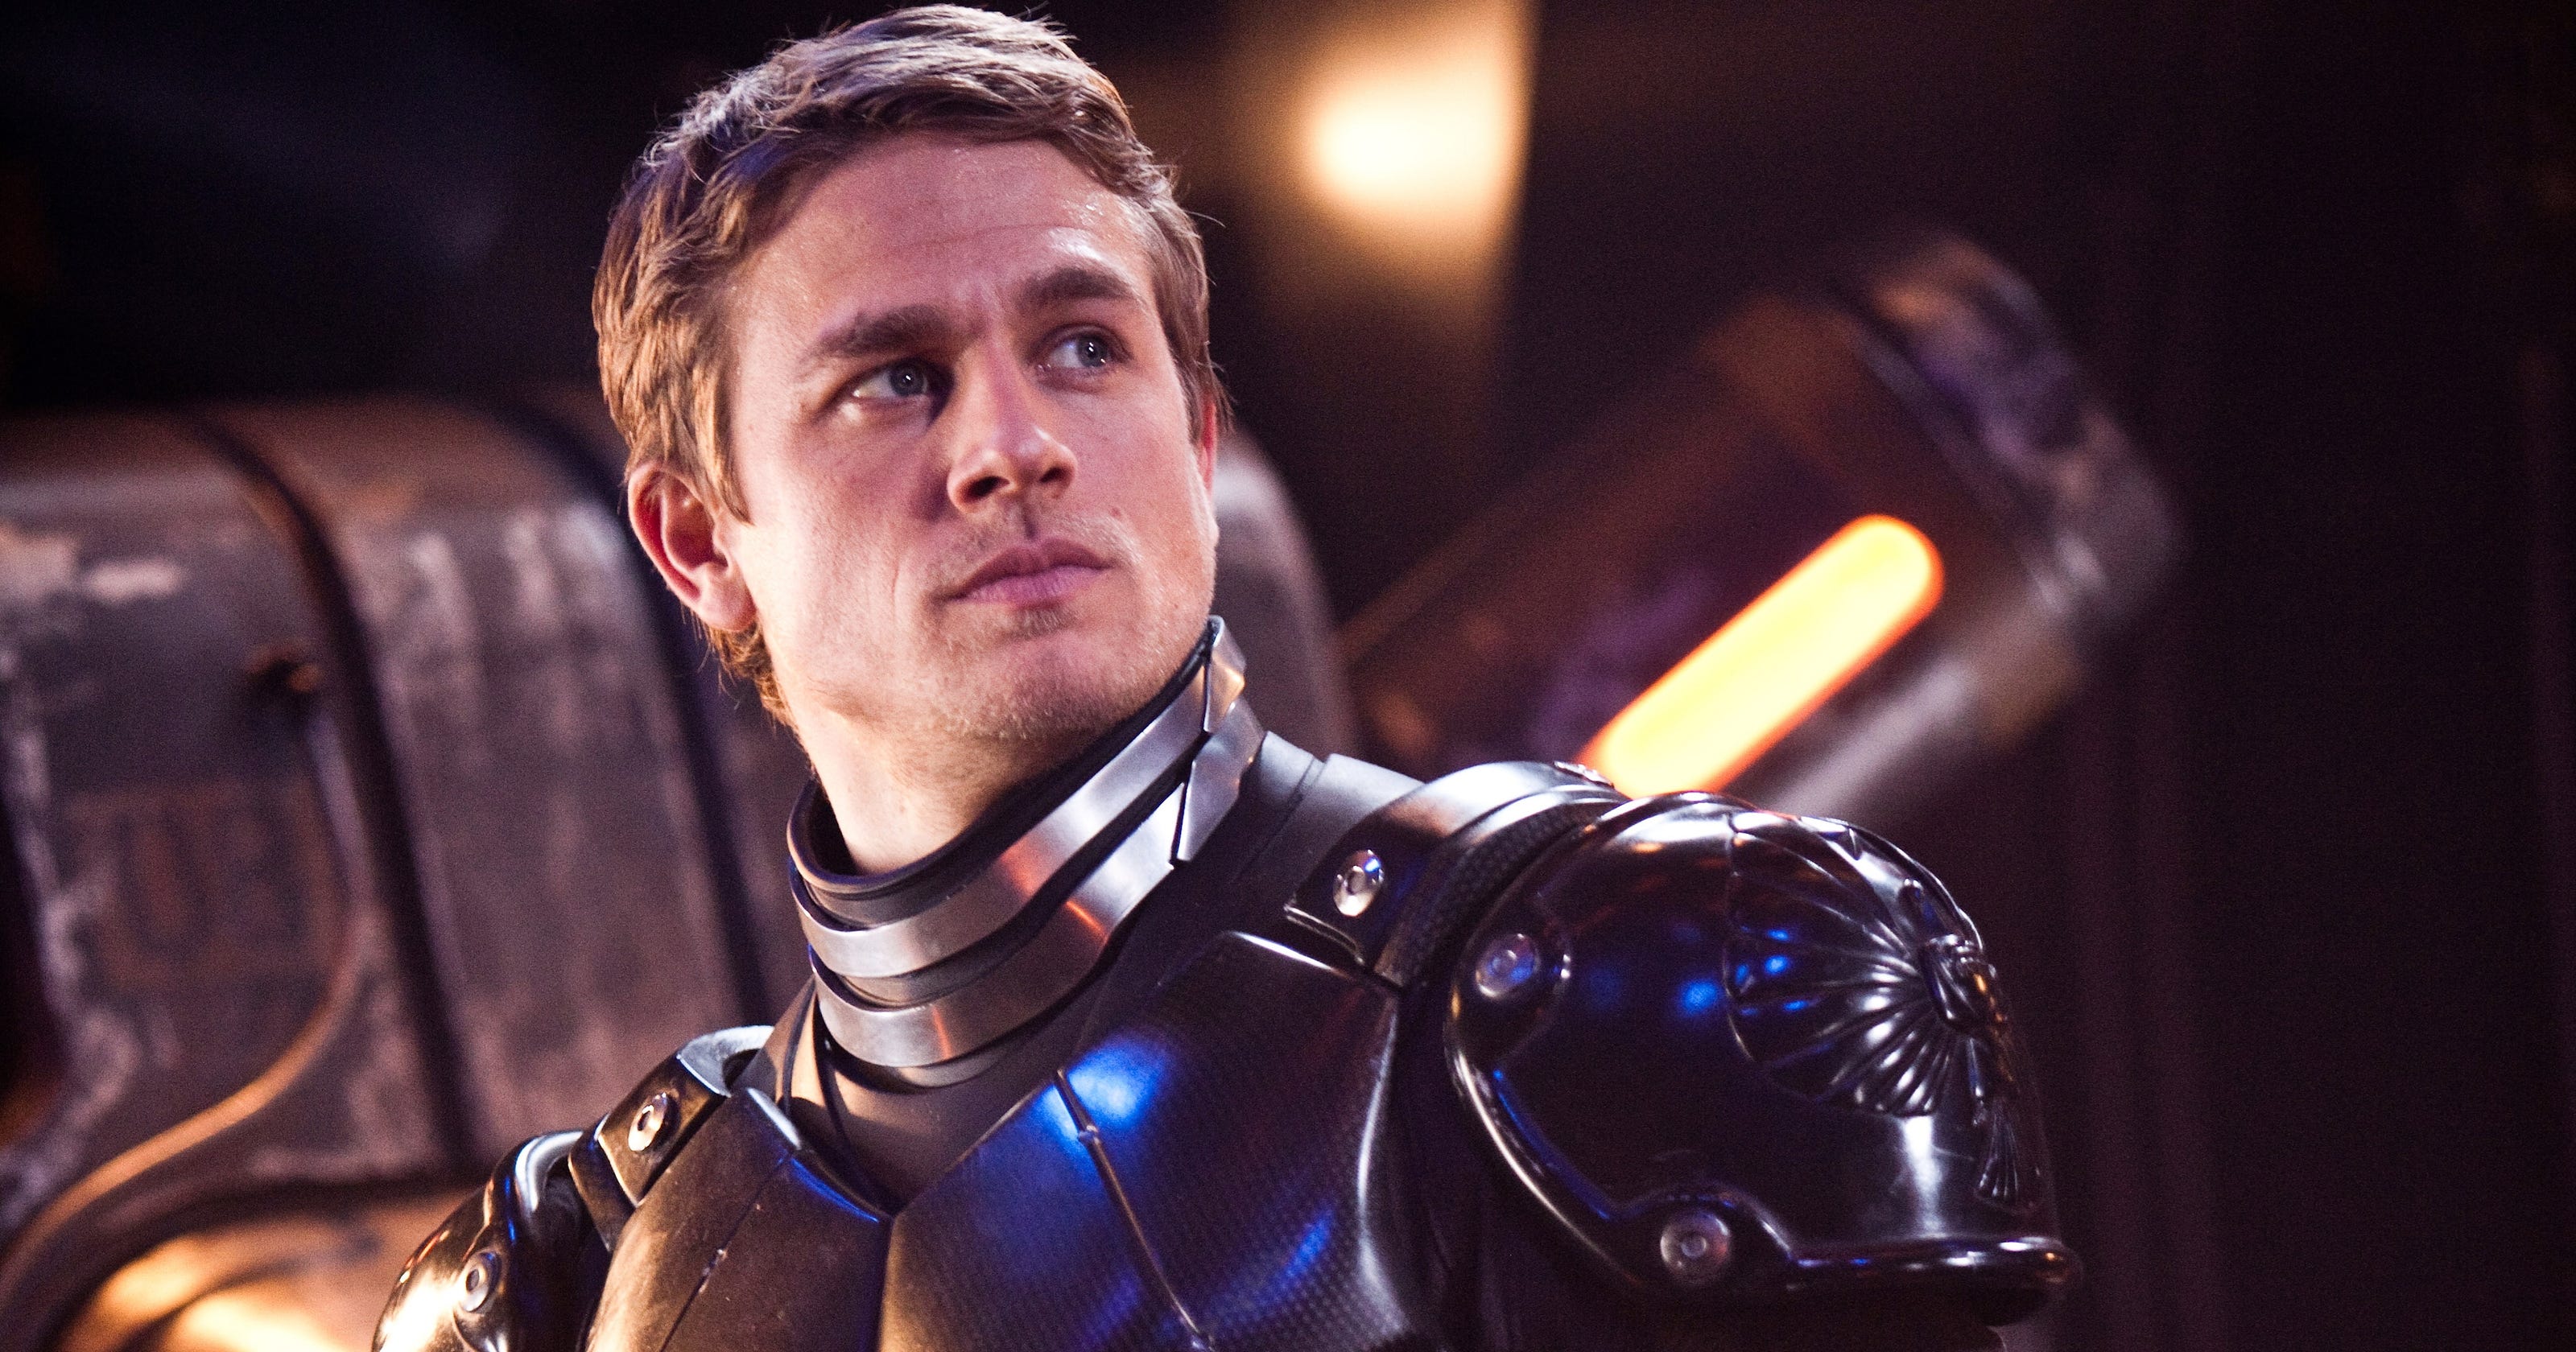 Charlie Hunnam brings swagger to world of 'Pacific Rim'